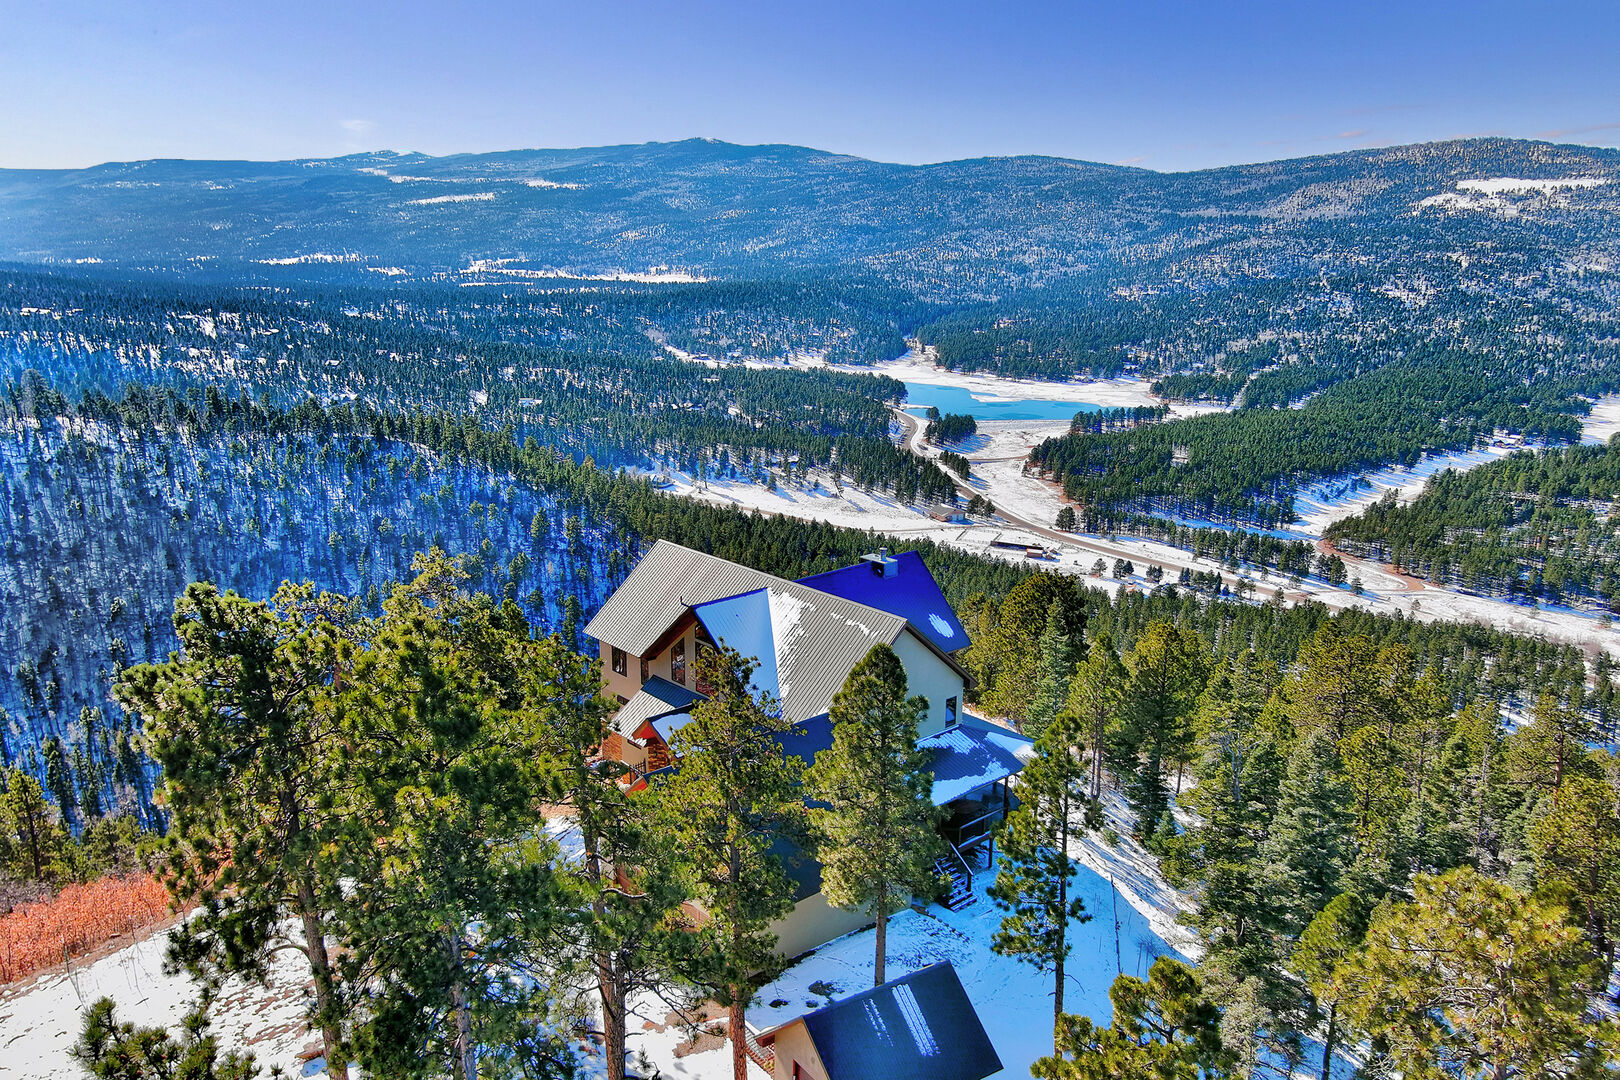 The Ultimate Winter Long Weekend at Angel Fire Vacation Rentals